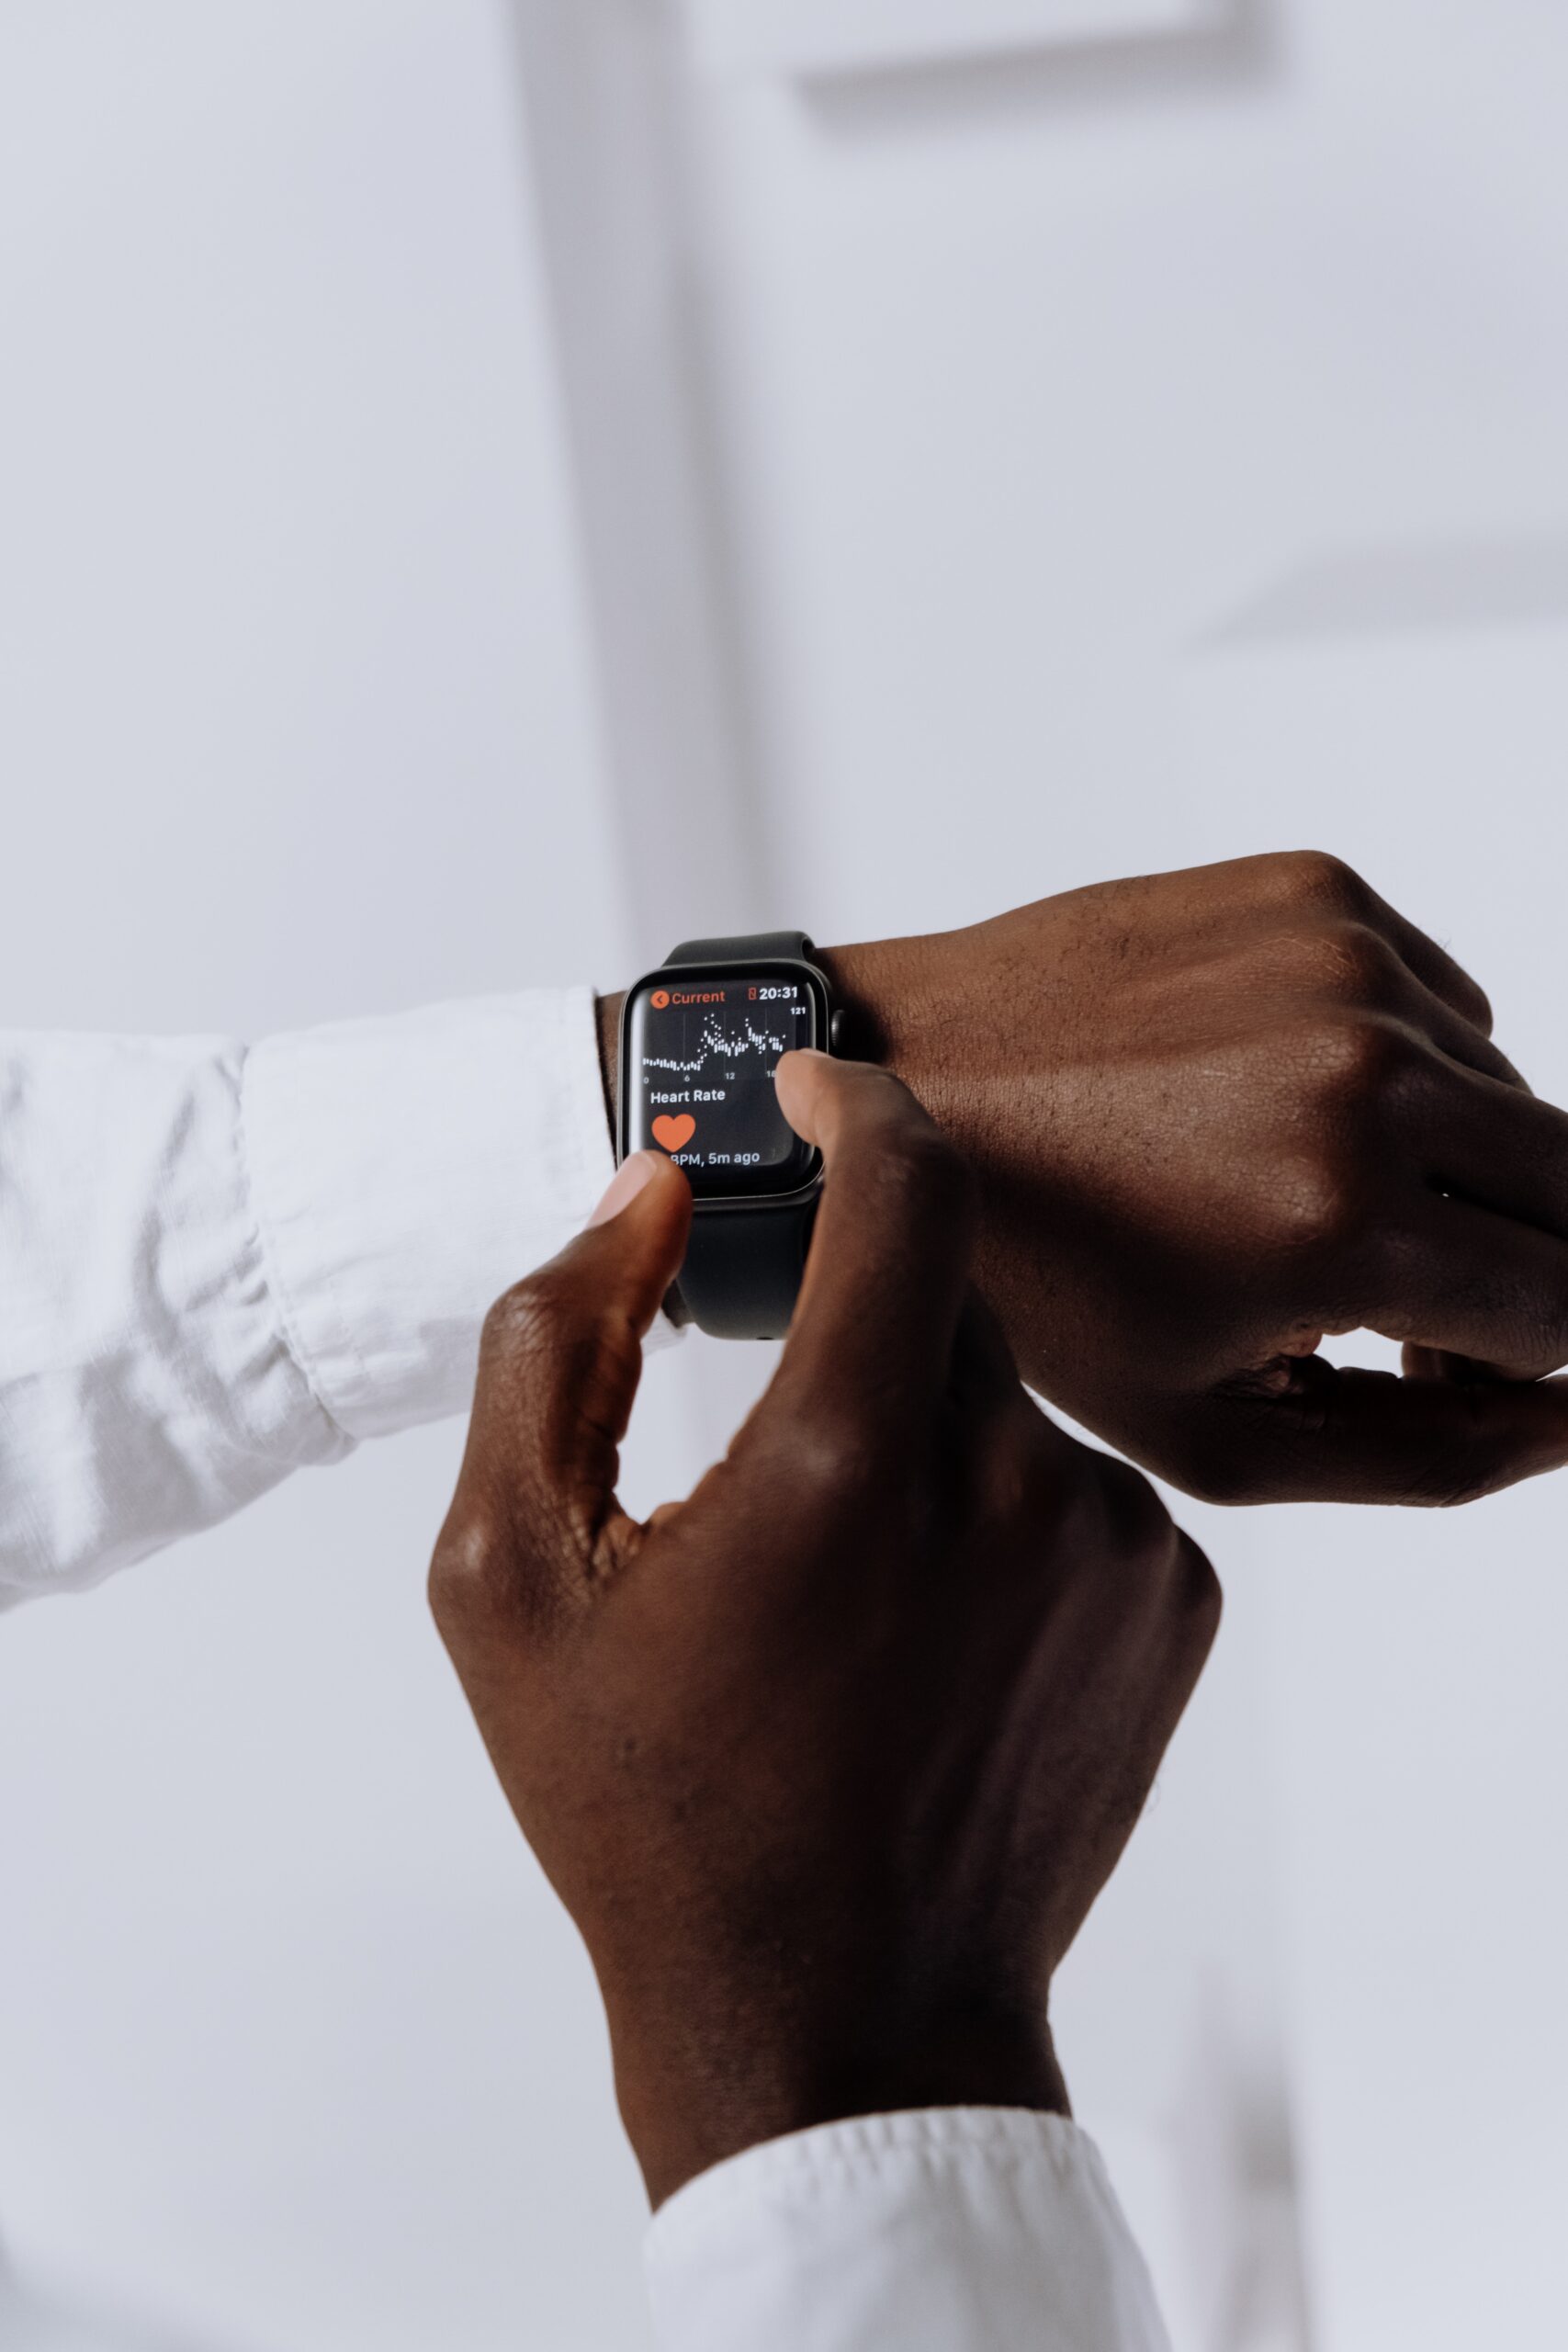 Close up image of an Apple watch on a person's left wrist. The cuff of a white dress shirt is visible. The person's right hand is adjusting the watch.